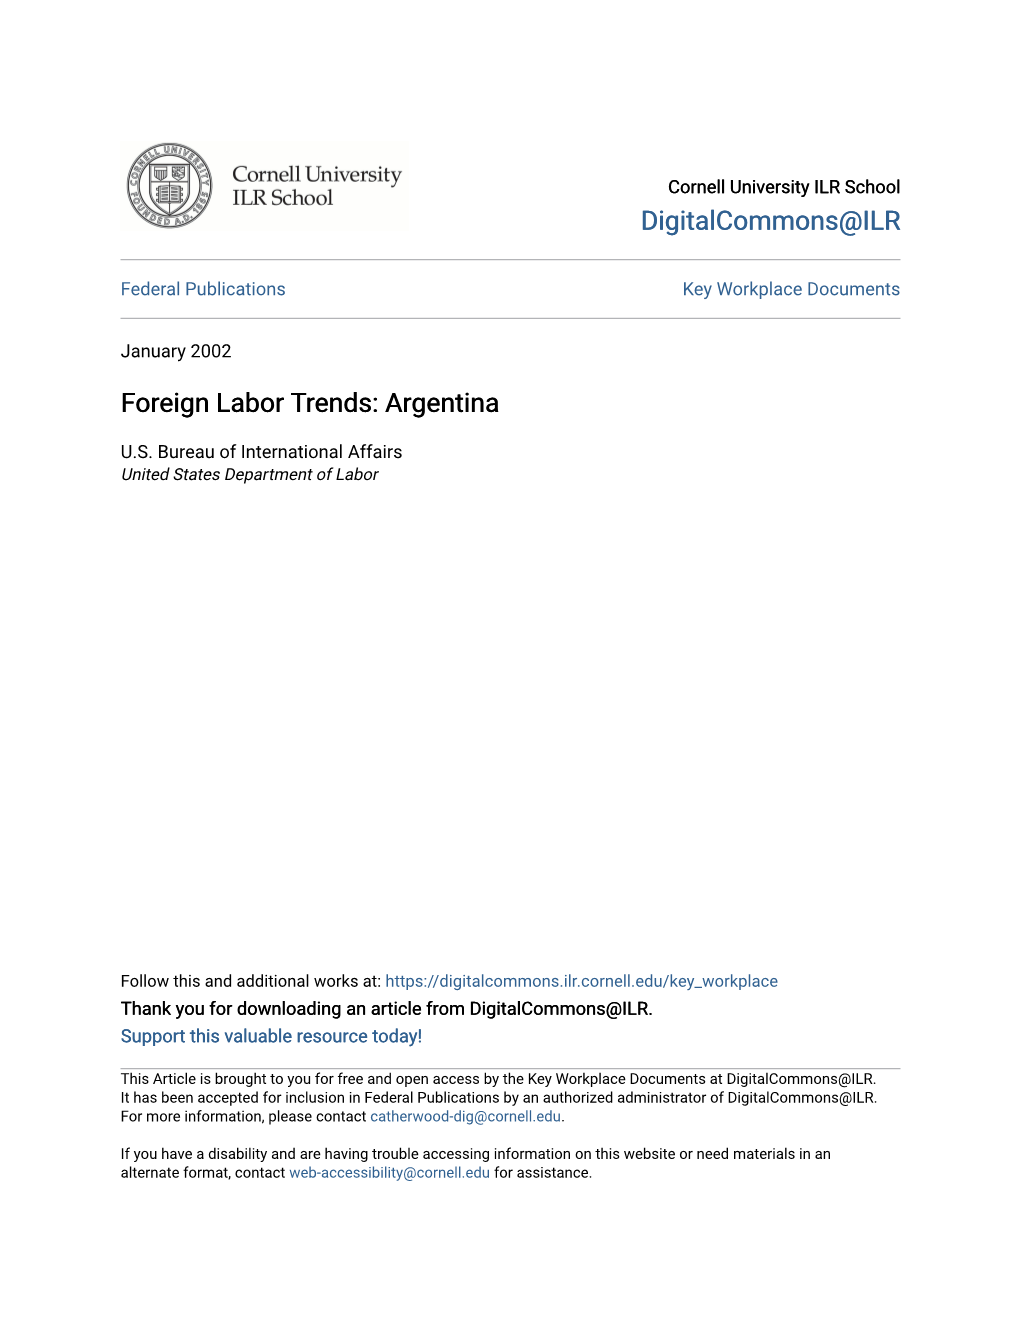 Foreign Labor Trends: Argentina